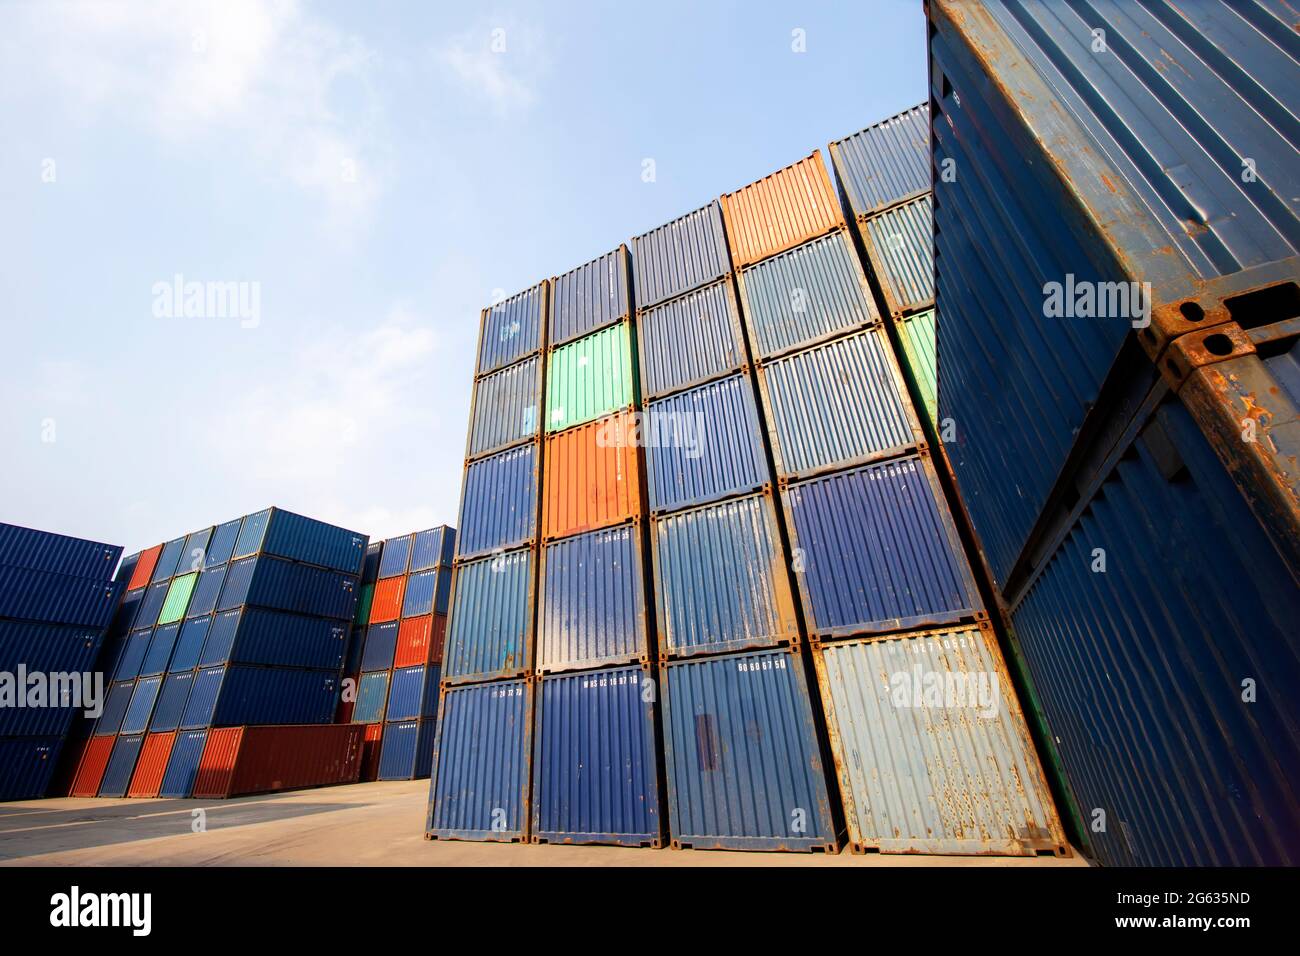 Container Cargo Port Ship Yard Storage Handling of Logistic Transportation Industry. Row of Stacking Containers of Freight Import/Export Distribution Stock Photo